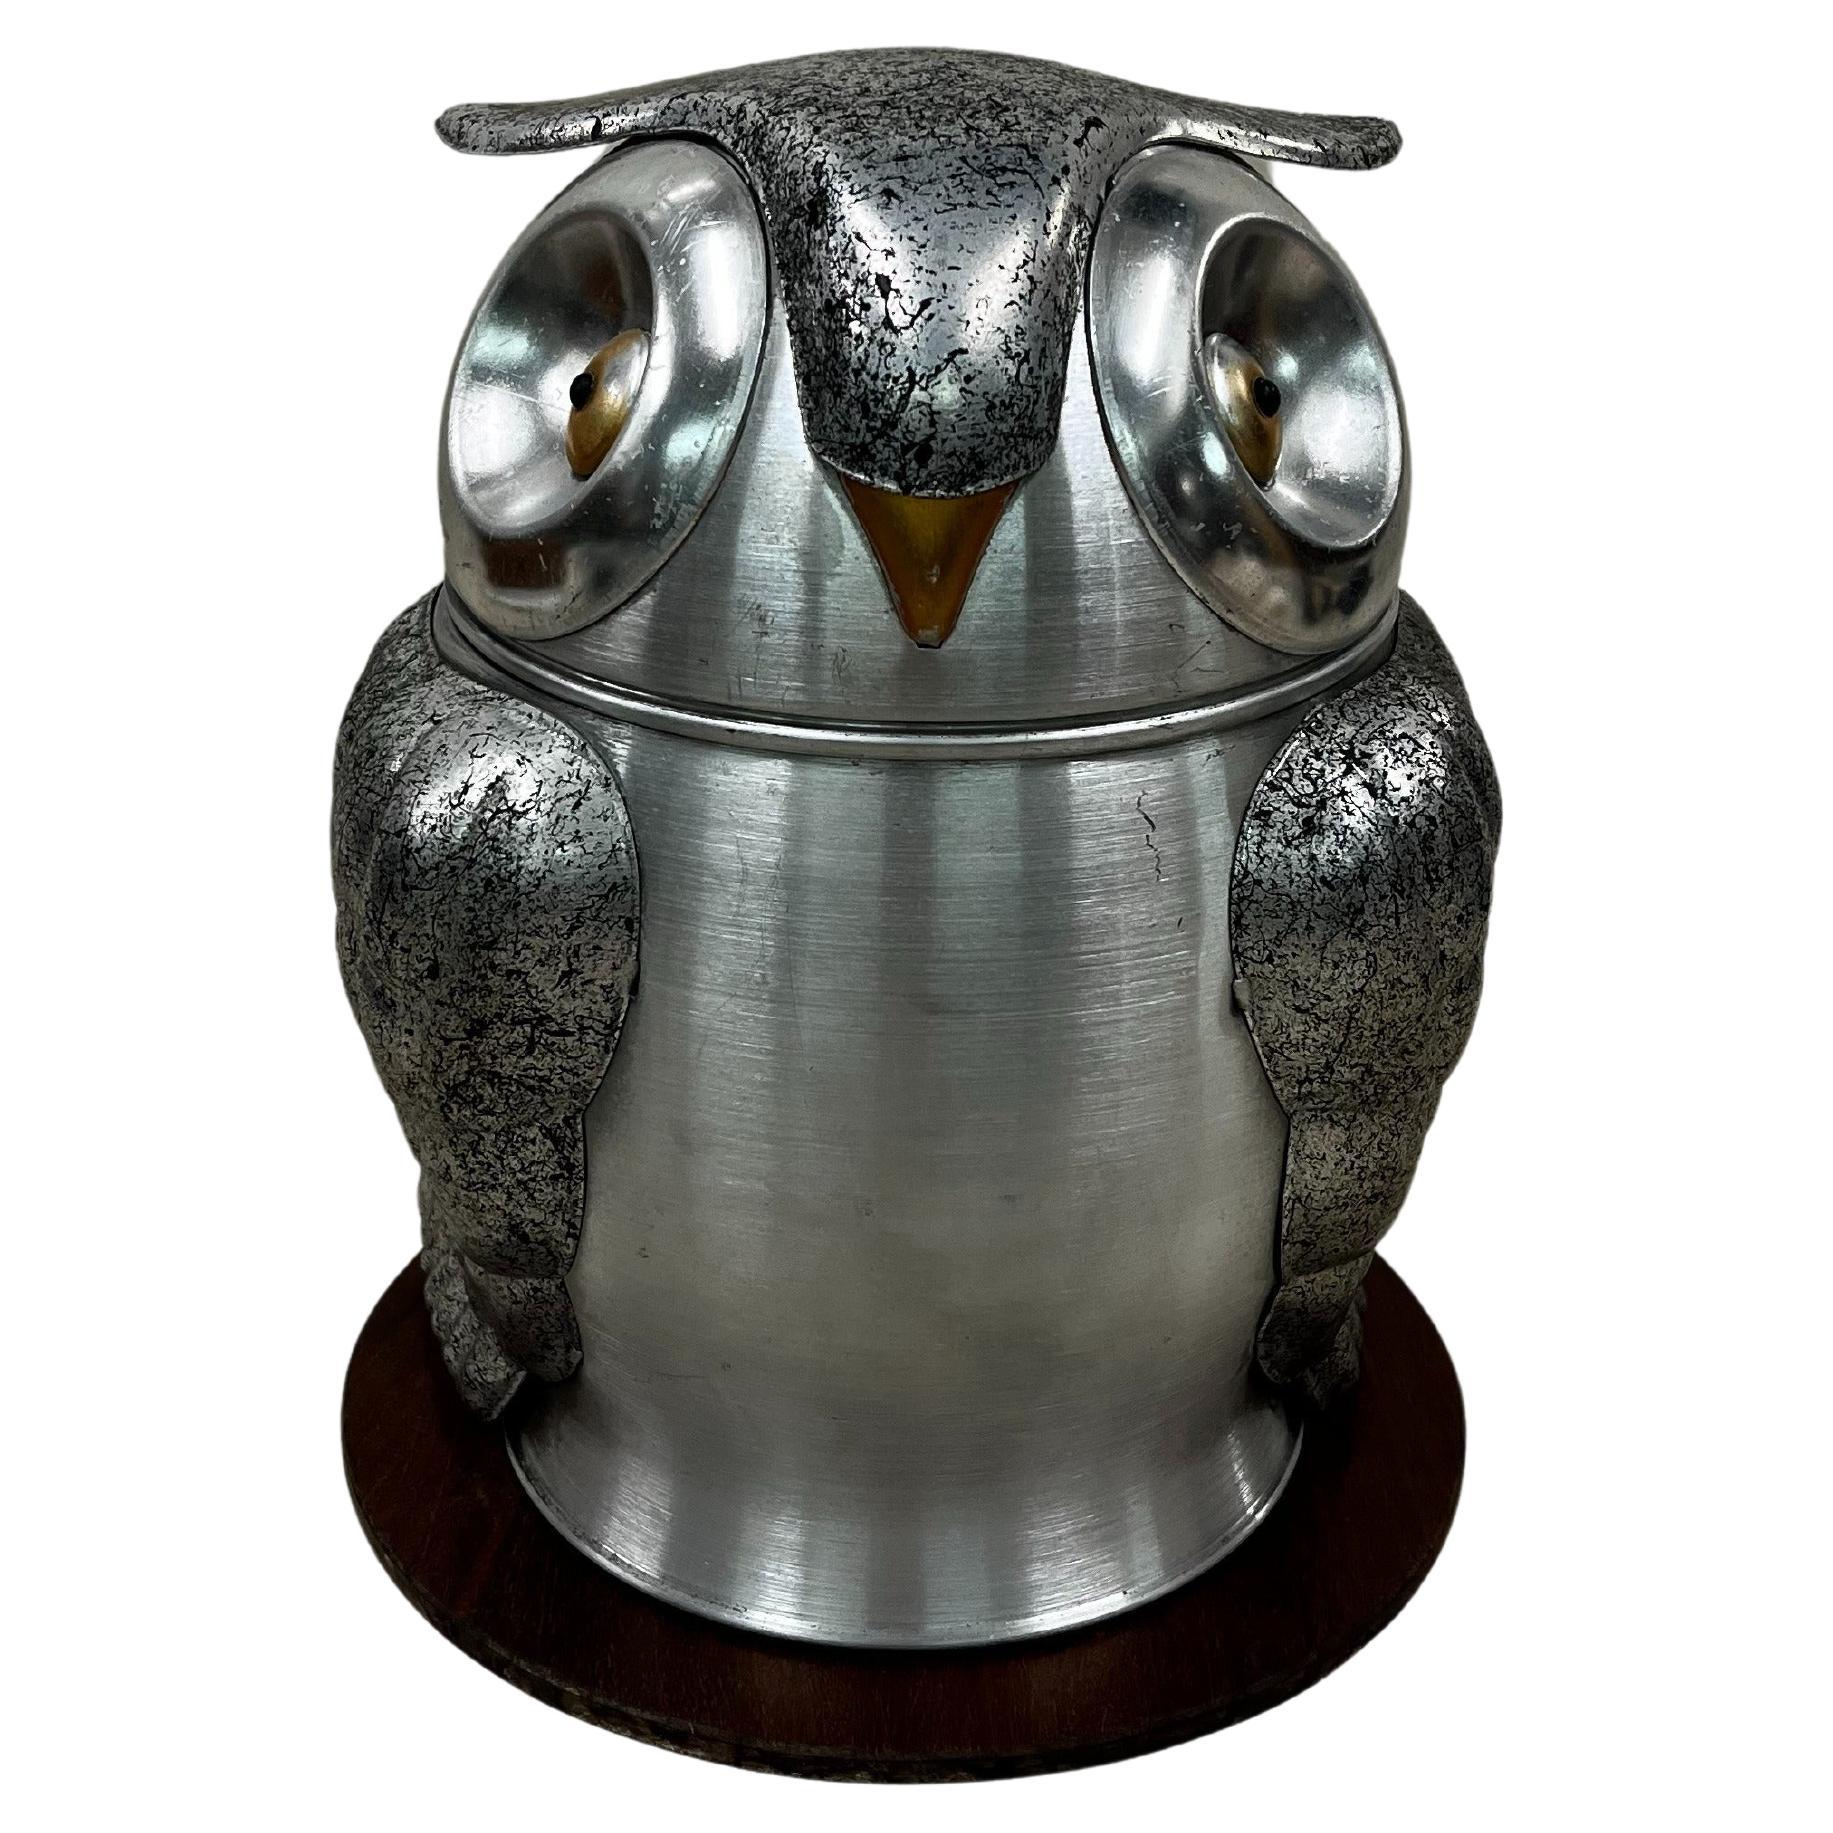 Big ice bucket in form of an owl, vintage 1960/70 Mid-Century, Italy